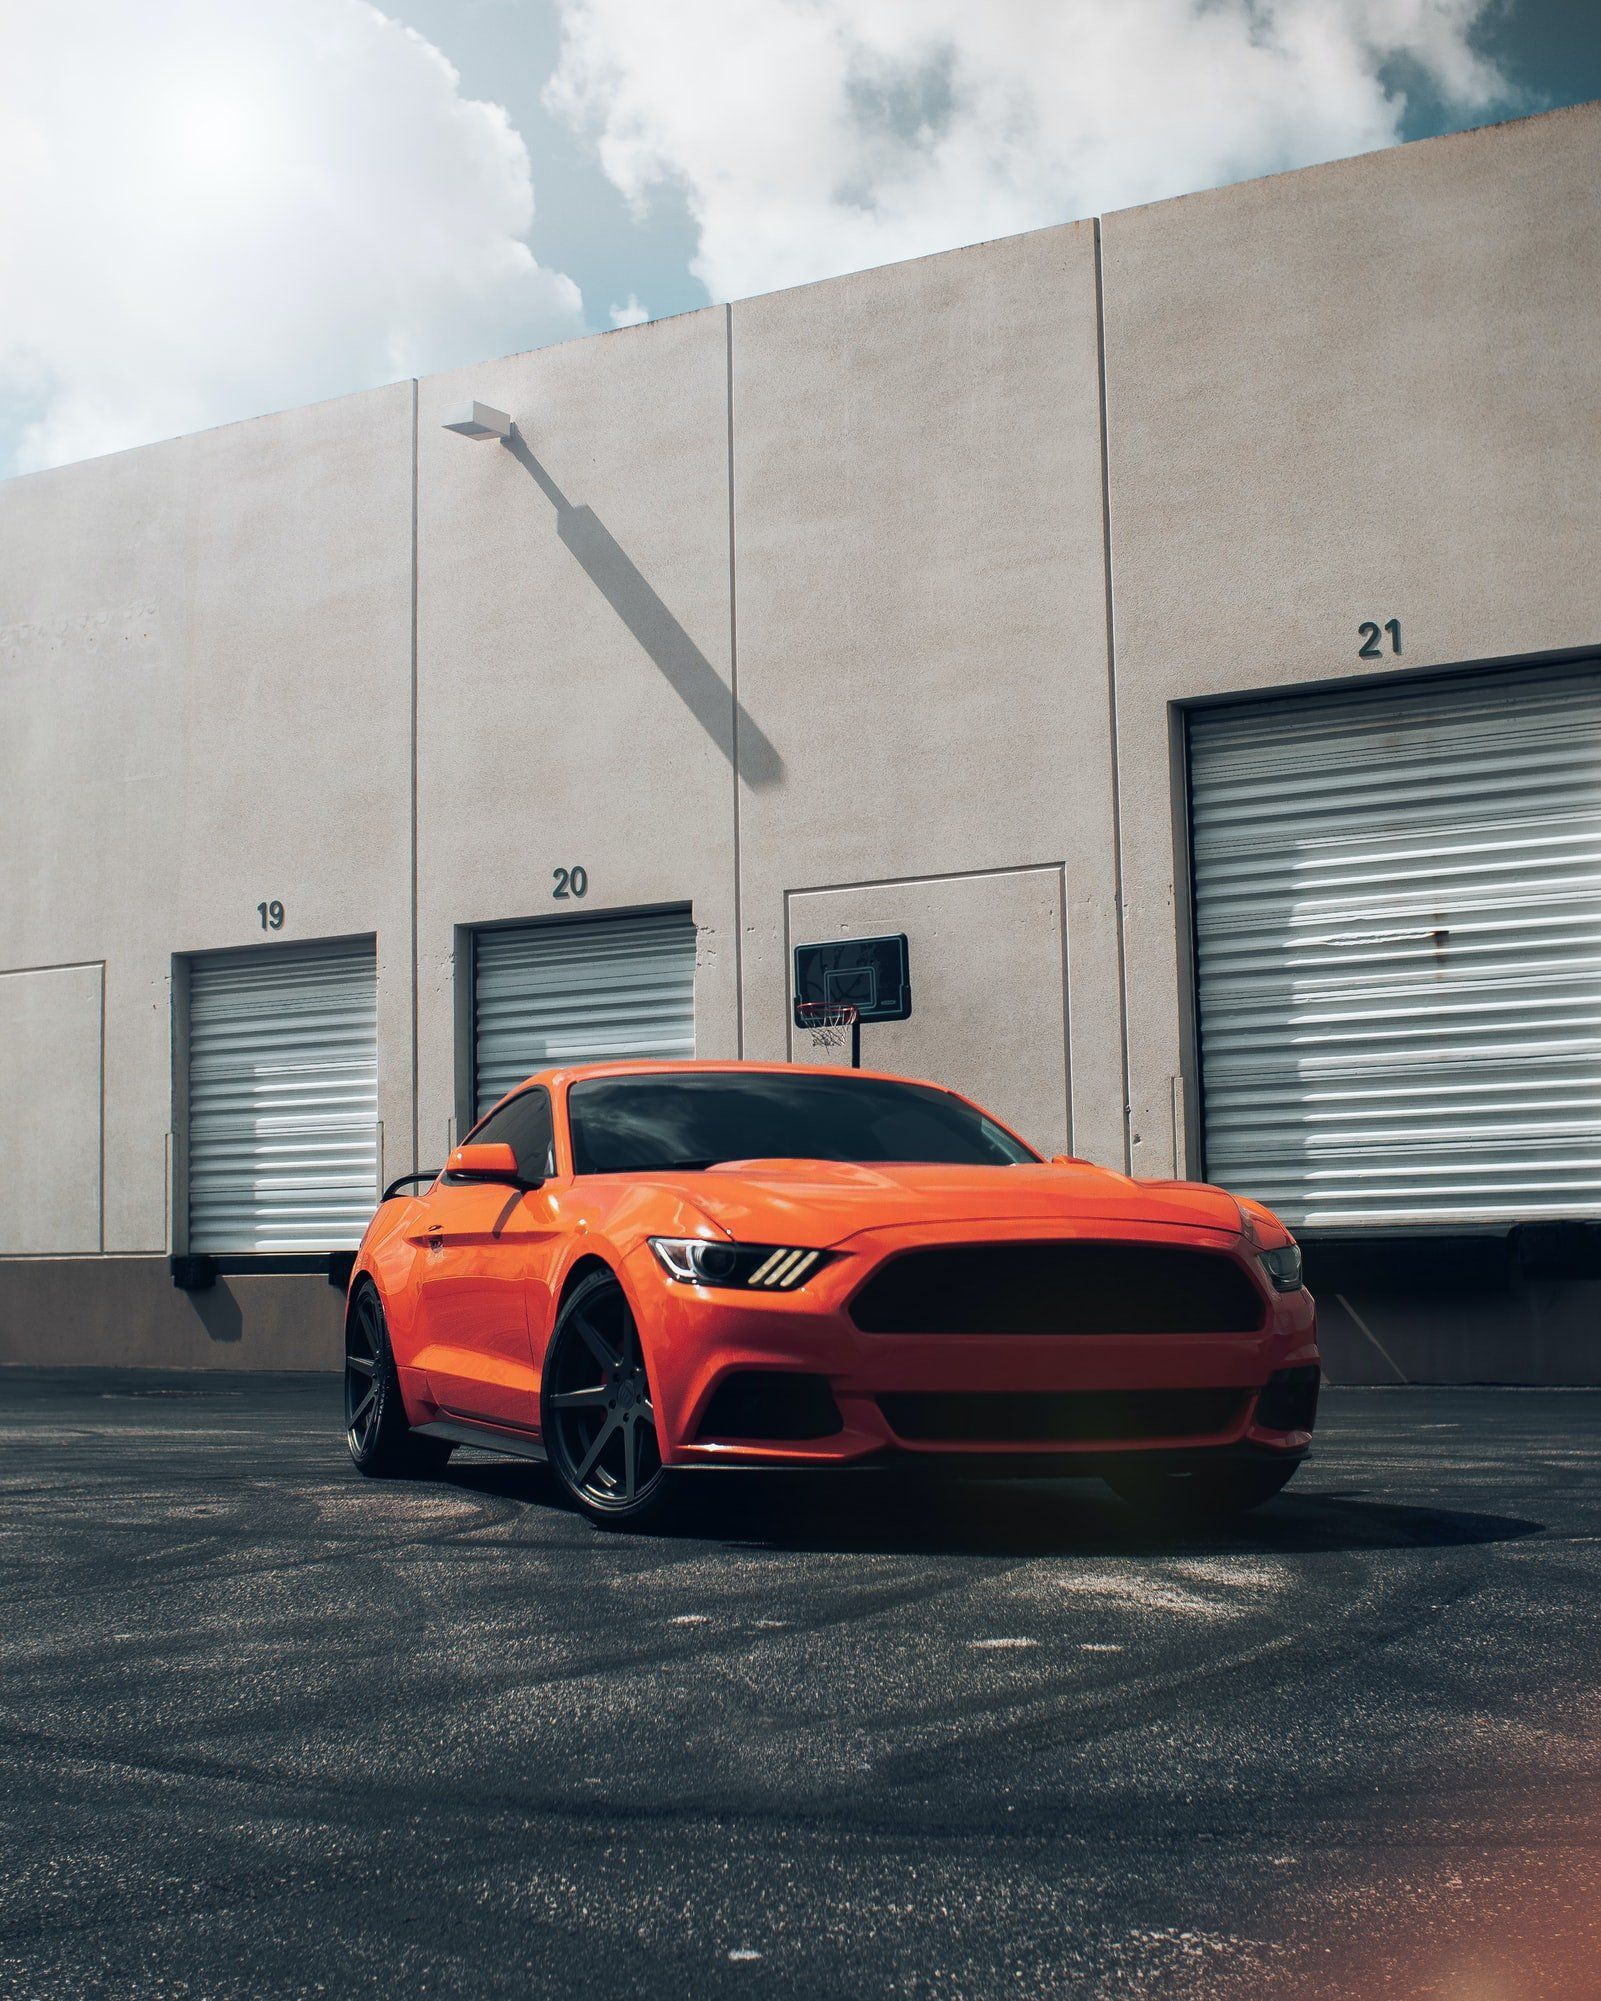 An orange mustang is parked in front of a building with garage doors.